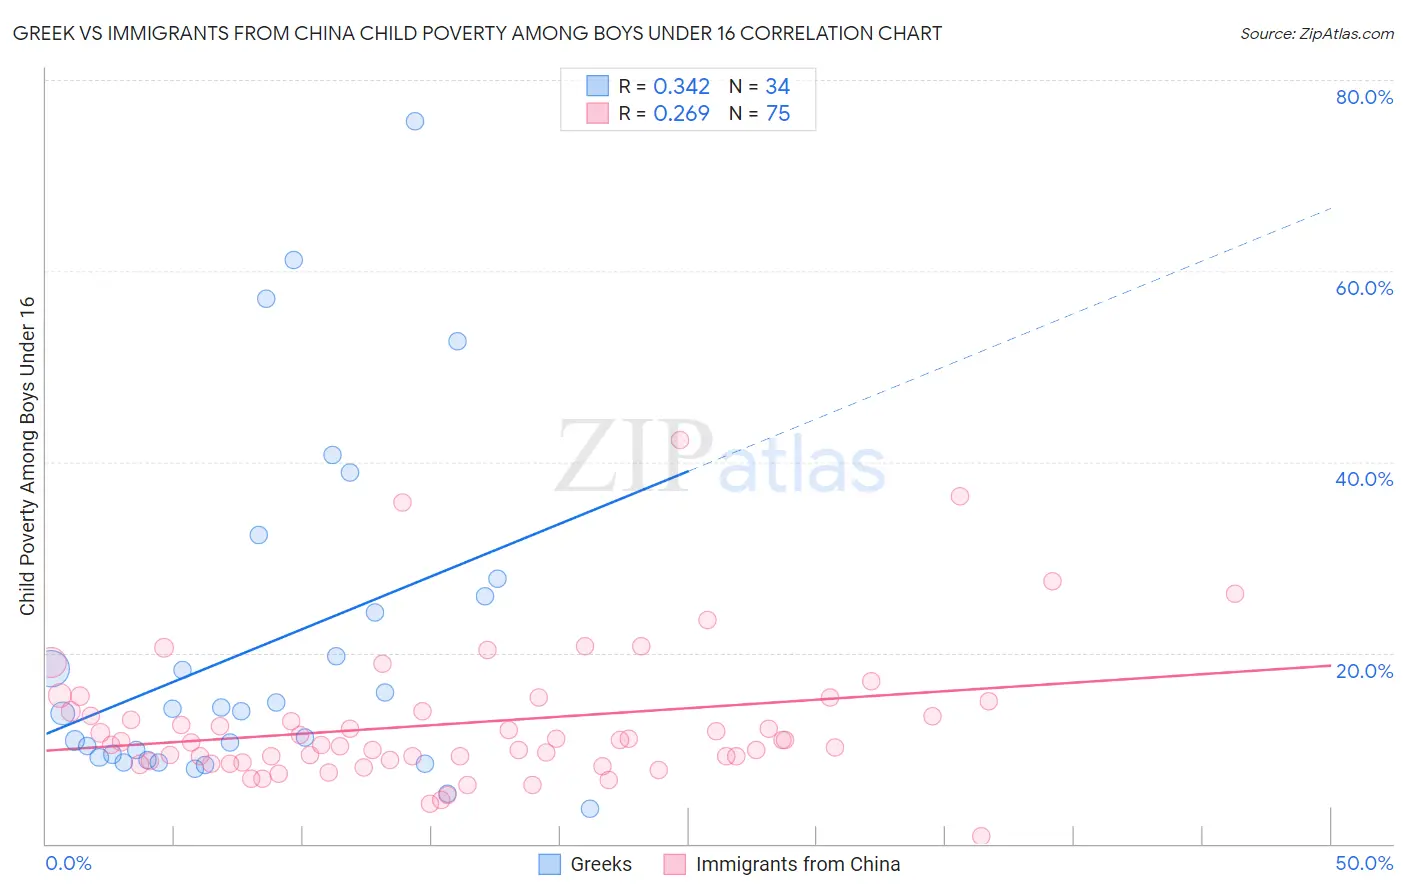 Greek vs Immigrants from China Child Poverty Among Boys Under 16